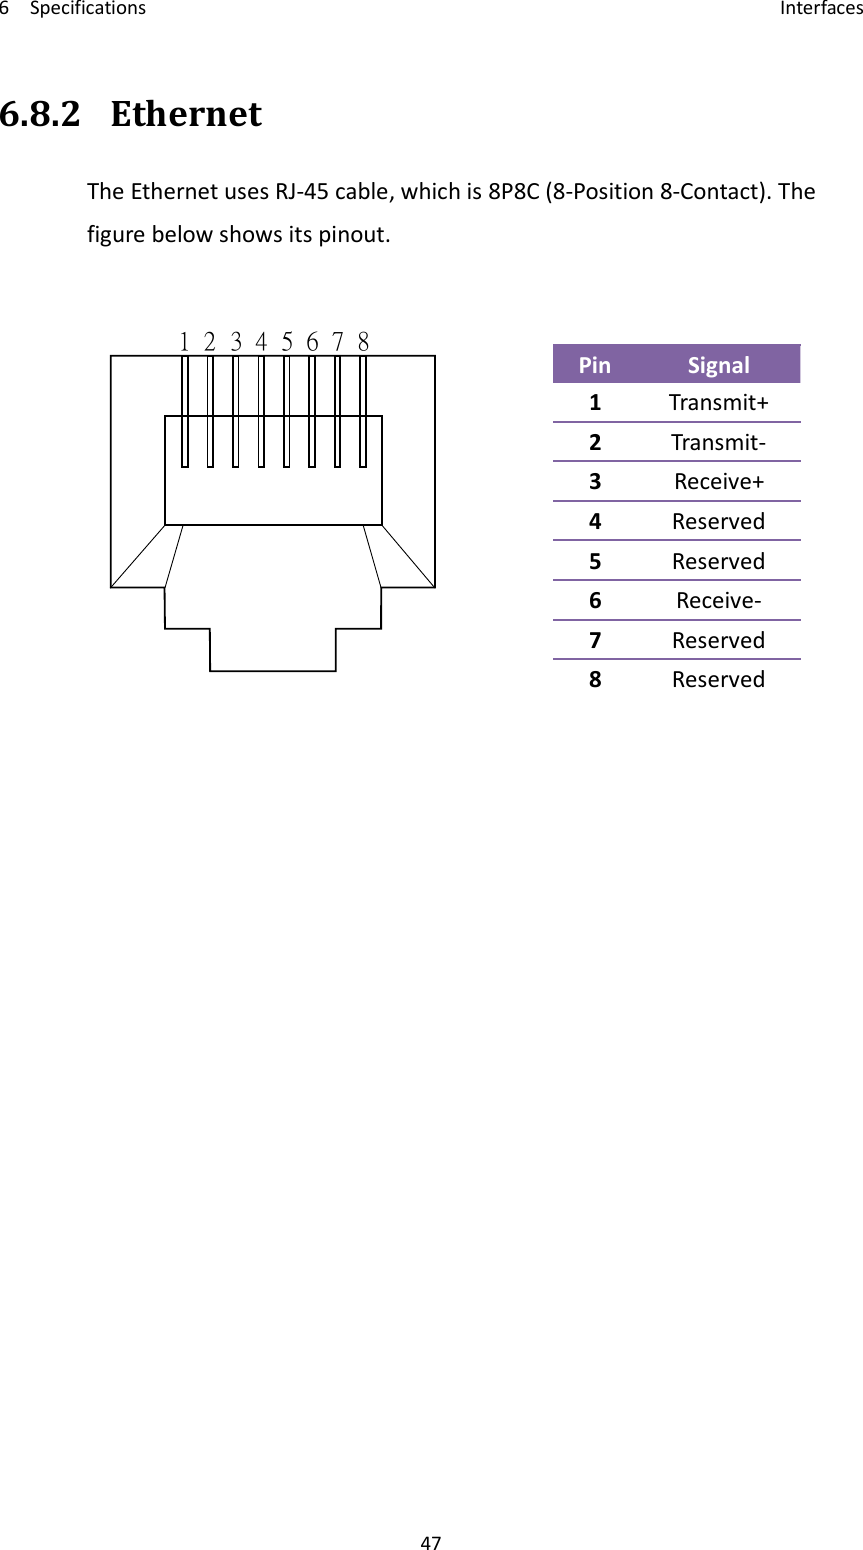 6    Specifications    Interfaces 47 6.8.2 Ethernet The Ethernet uses RJ-45 cable, which is 8P8C (8-Position 8-Contact). The figure below shows its pinout.   1 2 3 4 5 6 78Pin  Signal 1  Transmit+ 2  Transmit- 3  Receive+ 4  Reserved 5  Reserved 6  Receive- 7  Reserved 8  Reserved  